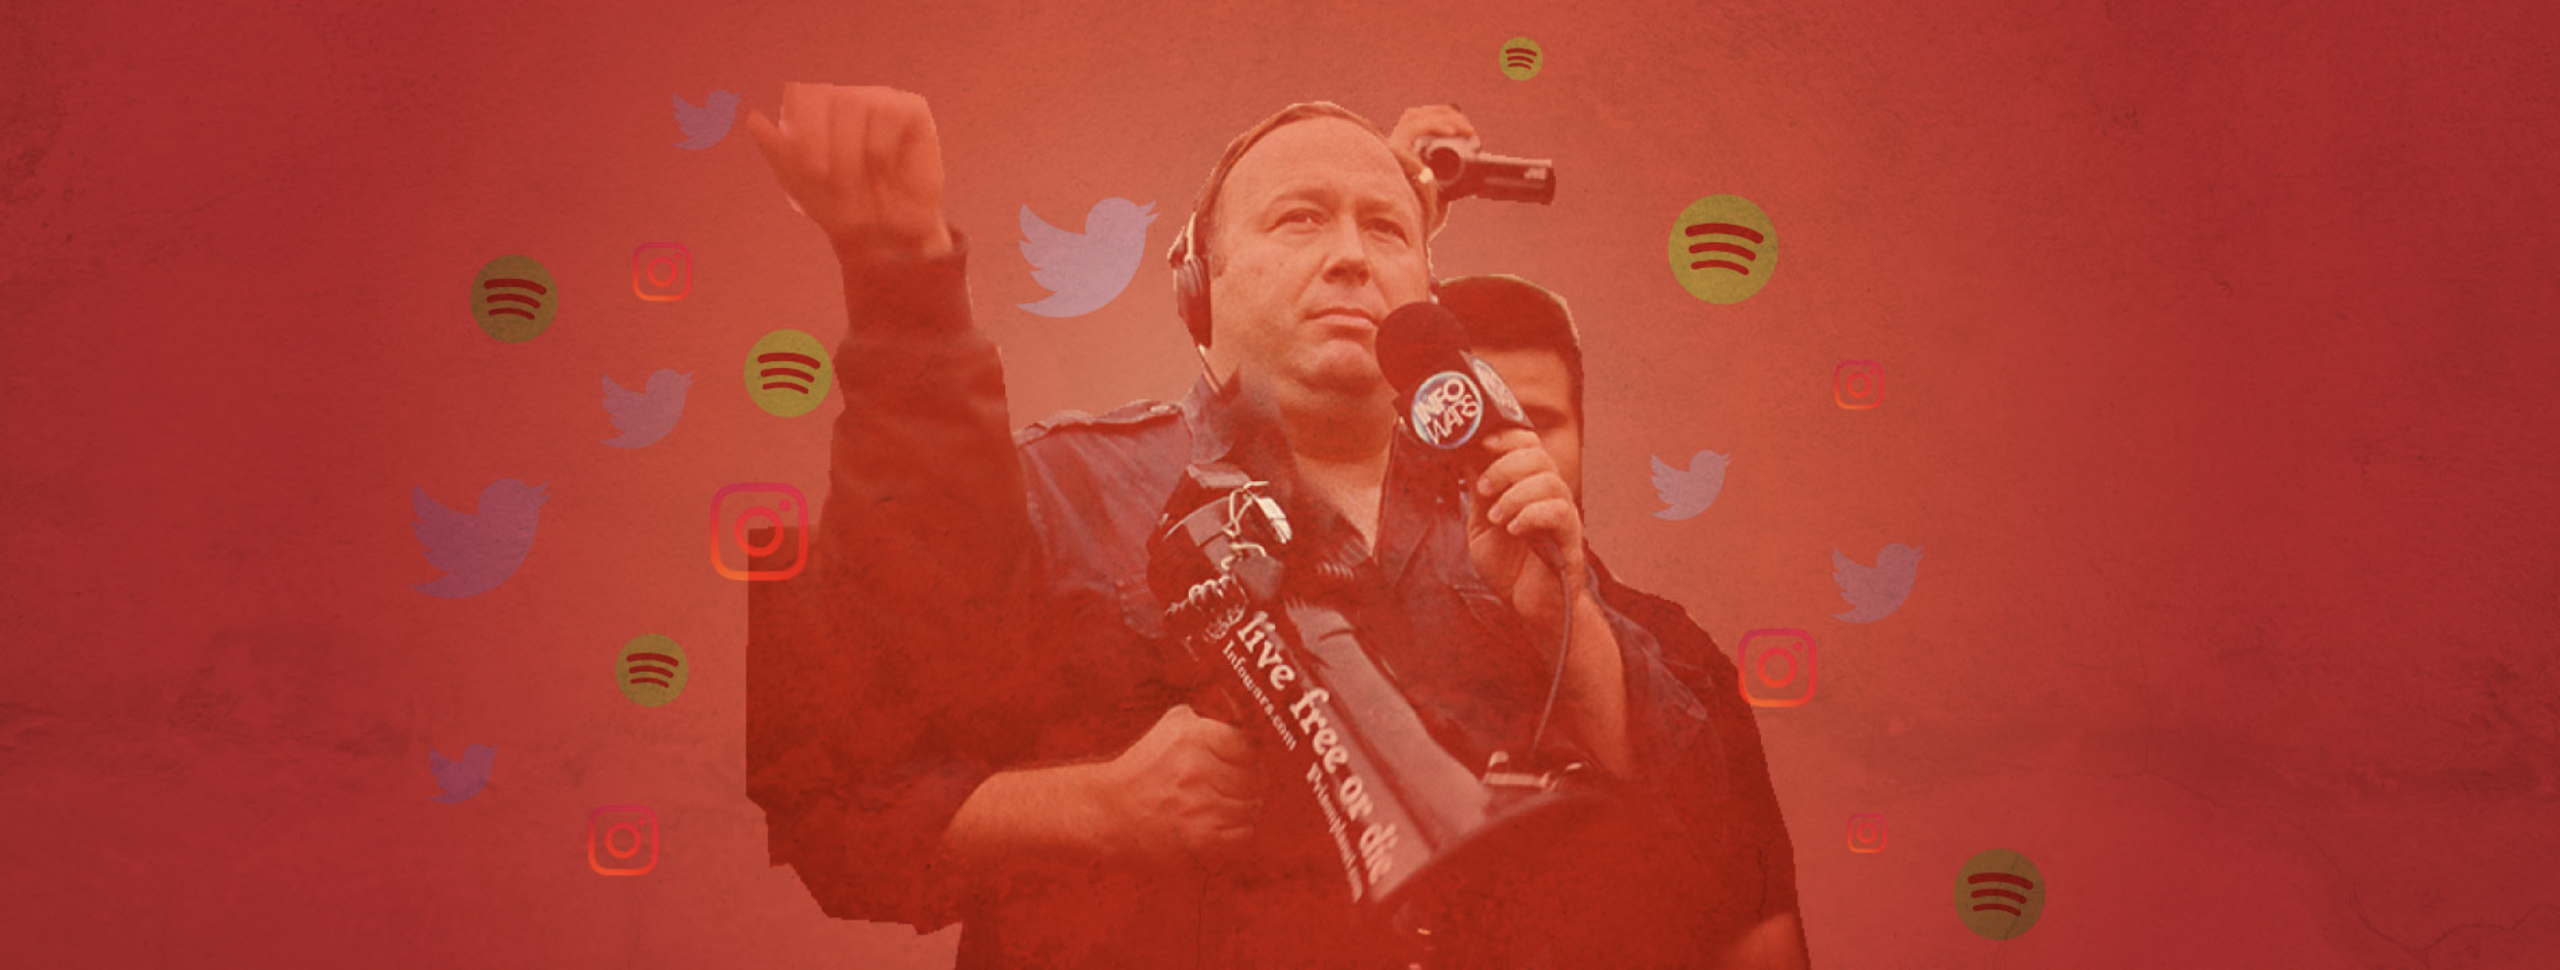 Infowars, resurrected: how the conspiracy site evaded a cross-platform ban